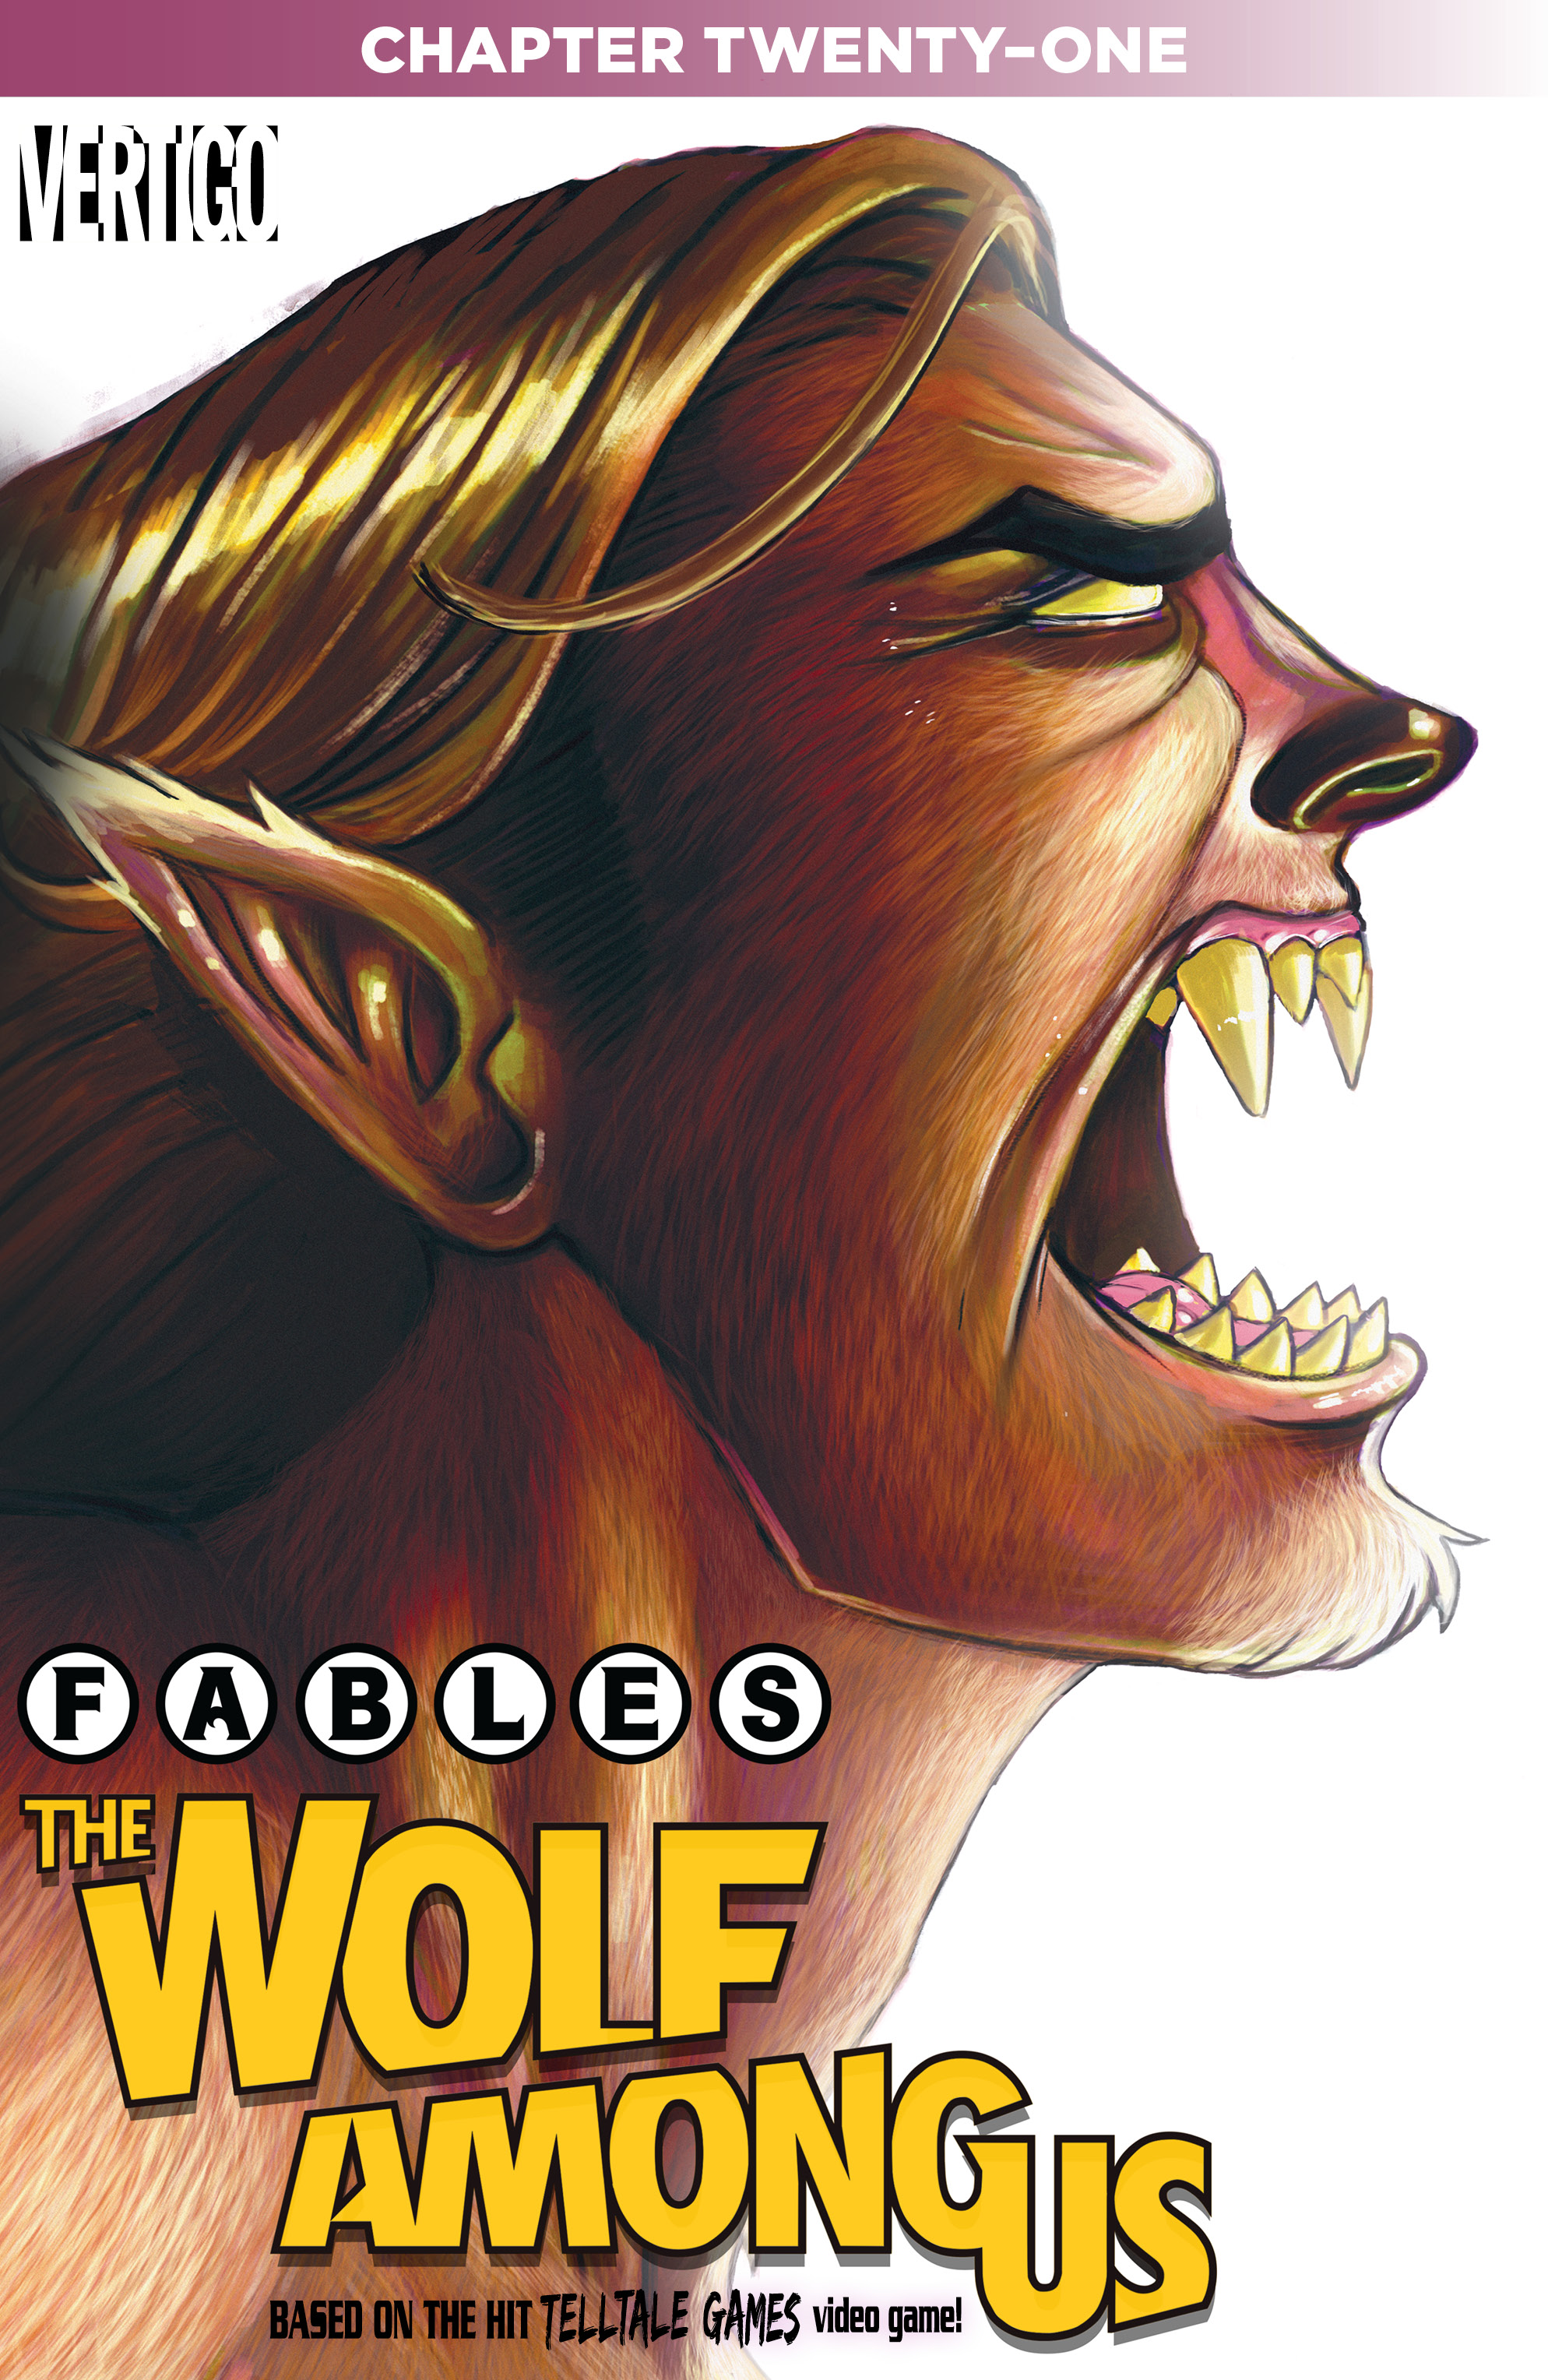 Fables: The Wolf Among Us #21 preview images